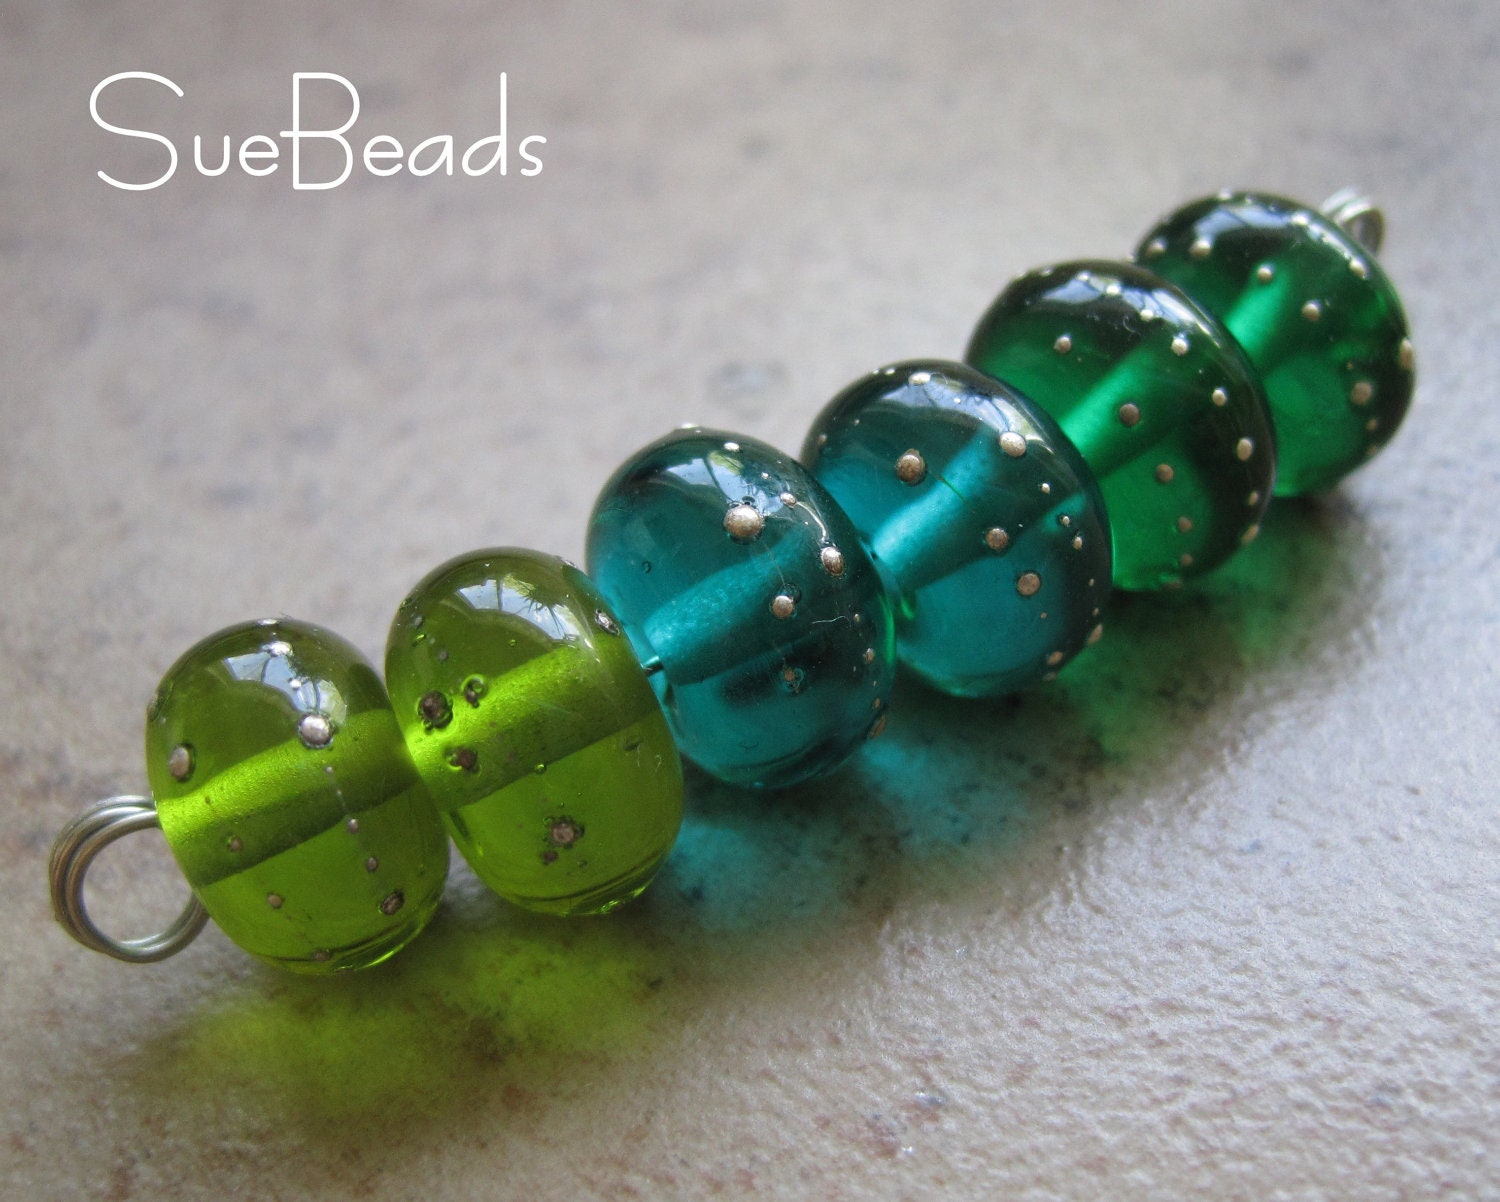 Lampwork Beads - SueBeads - Sparkle Mini Beads - Green Mix Sparkle Mini Set of 6 Unetched - Handmade Lampwork Beads - SRA M67